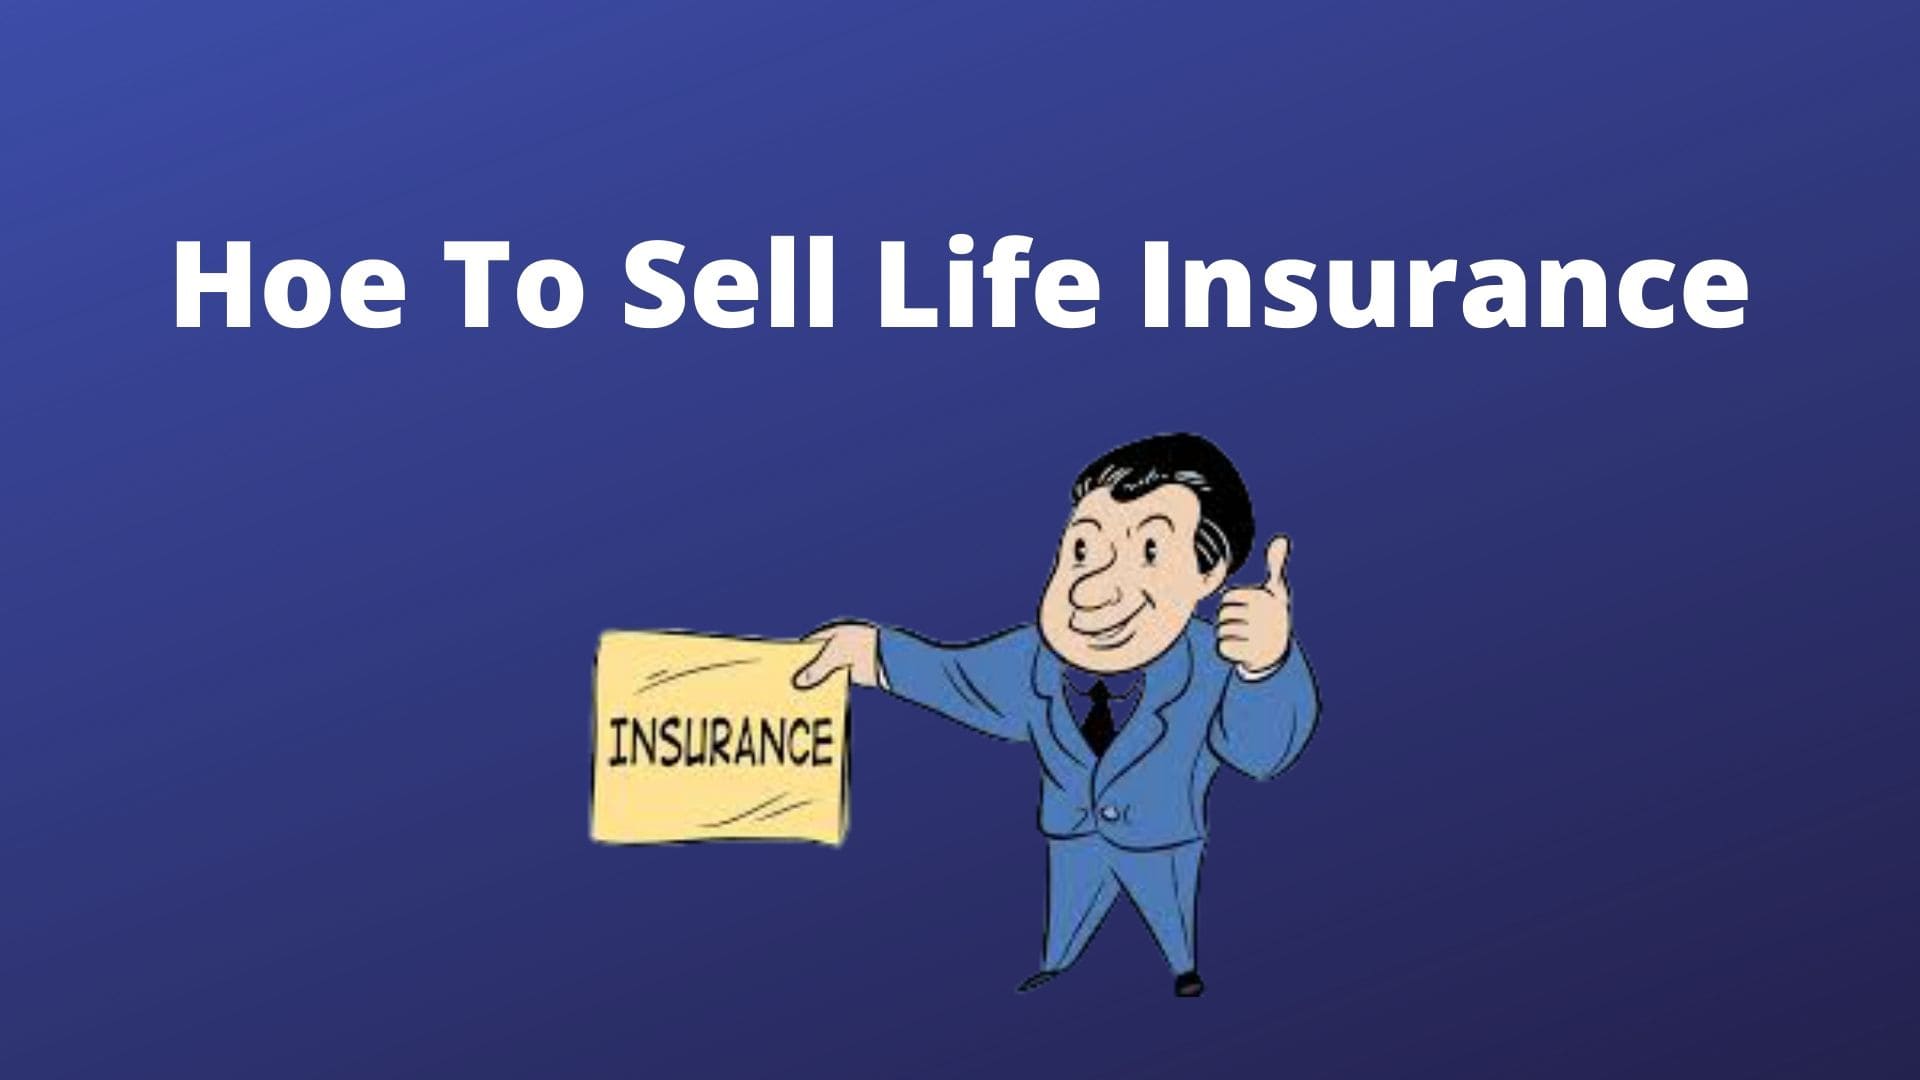 Everything You Need To Know About Life Insurance | Insurance Industry